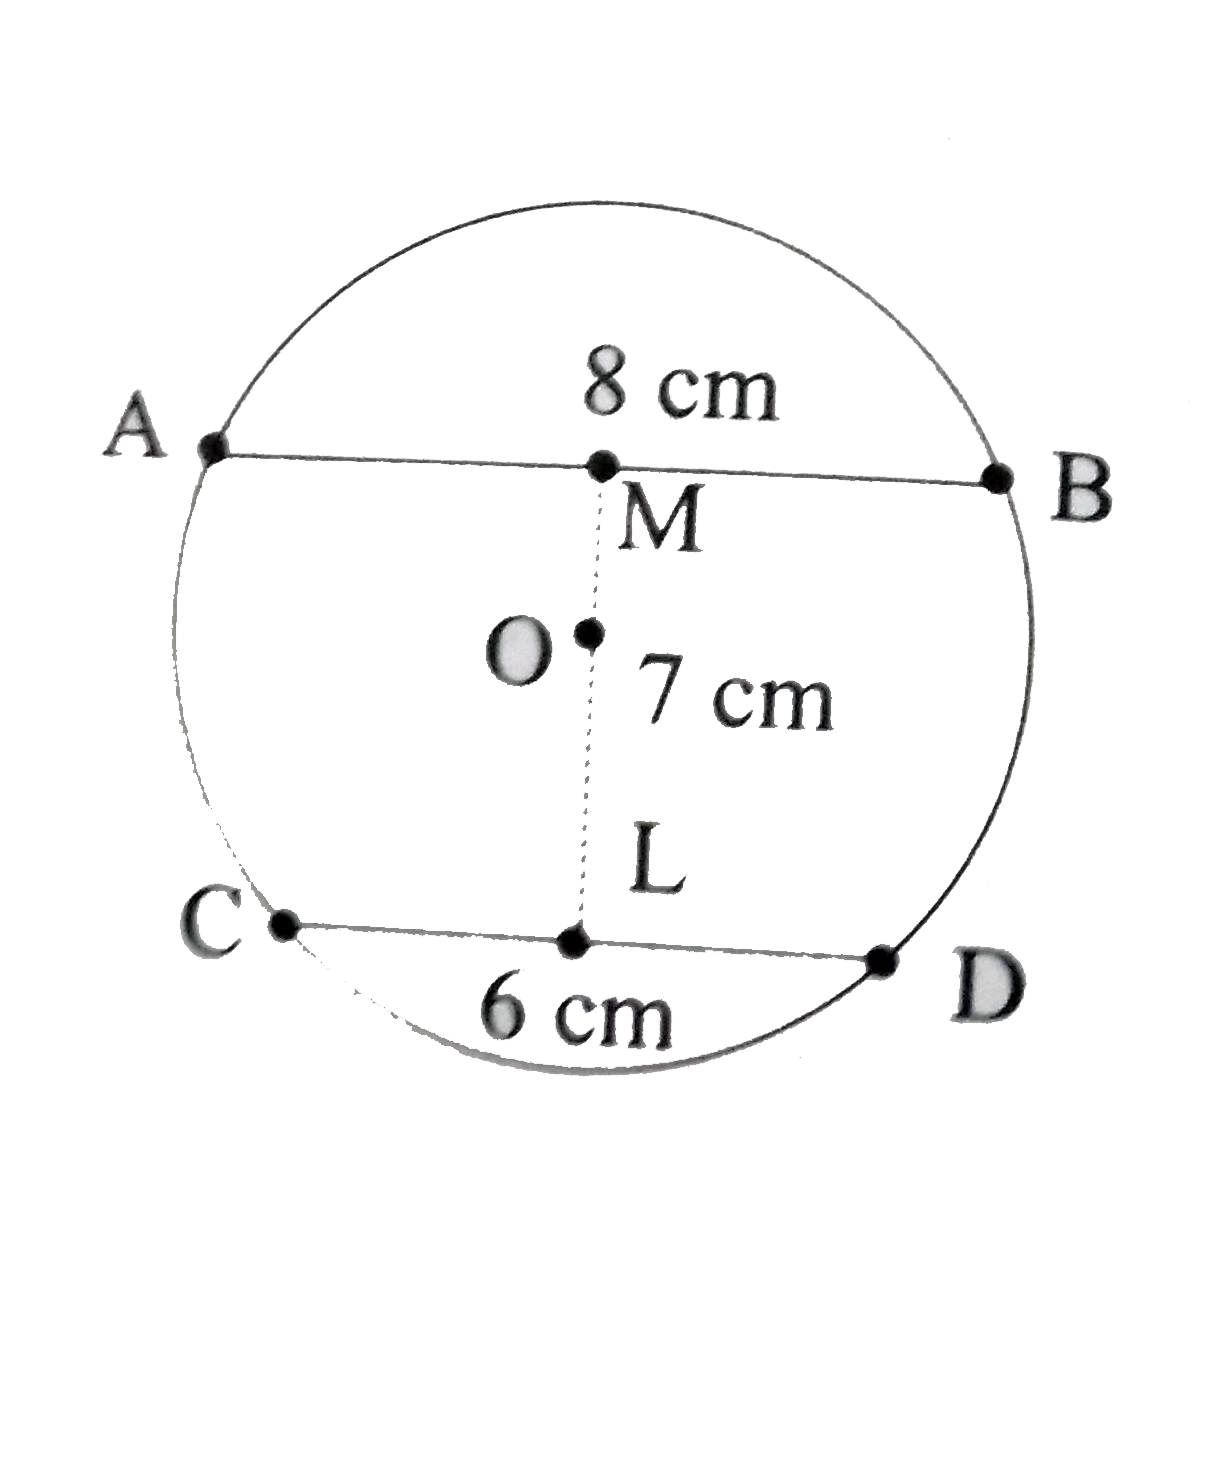 In the given figure, AB and CD are the parallel chords of a circle with centre O. Such that AB = 8 cm and CD = 6 cm. If OMbotAB and OLbotCD distance becween LM is 7 cm. Find the radius of the circle ?